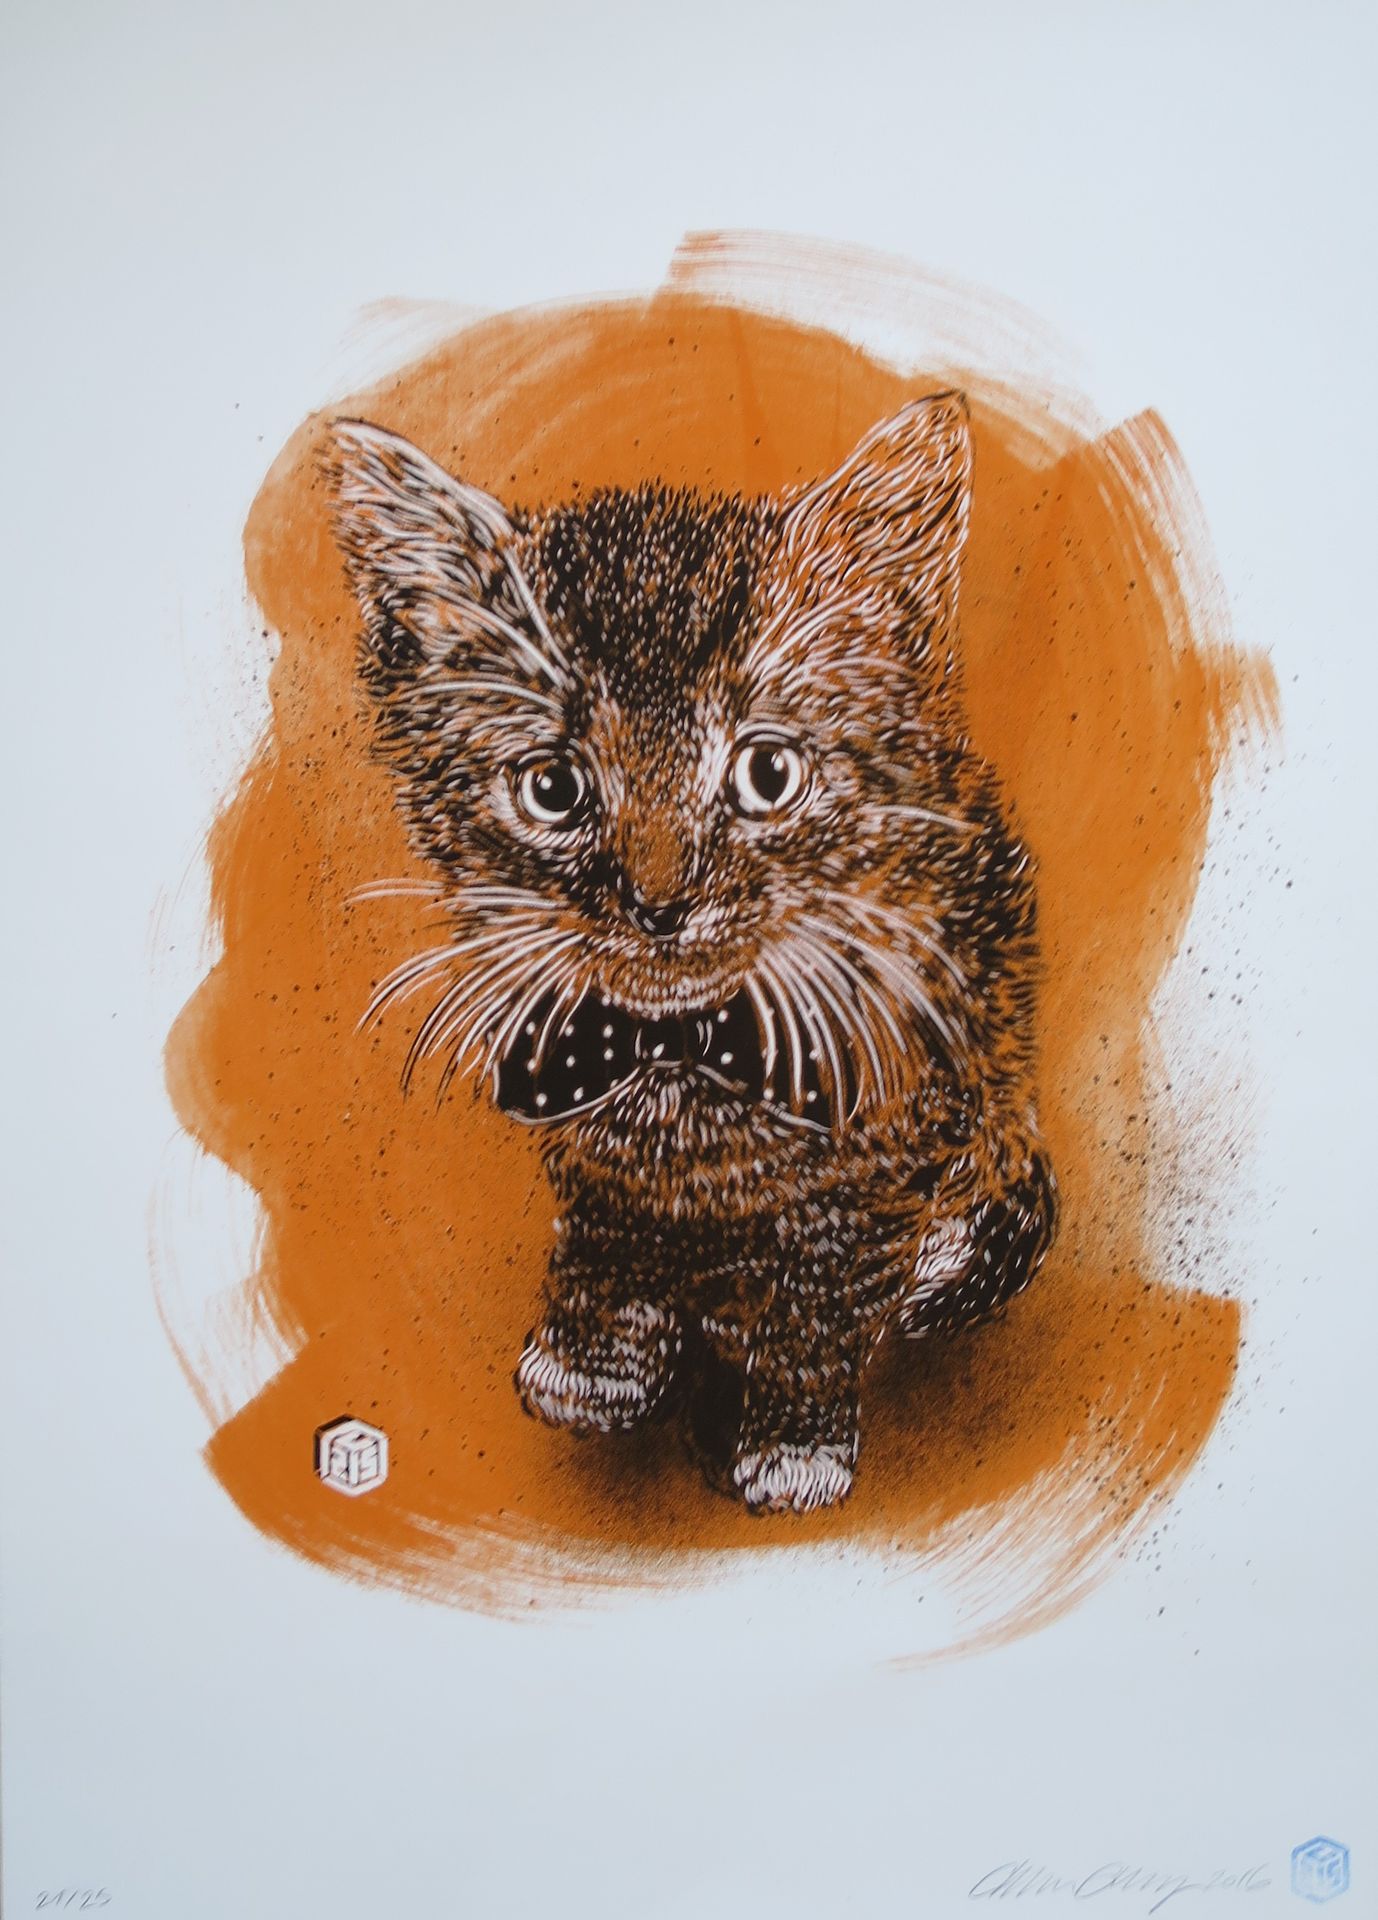 C215 C215 Charly caramel orange, 2016 Silkscreen Signed in pencil by the artist &hellip;